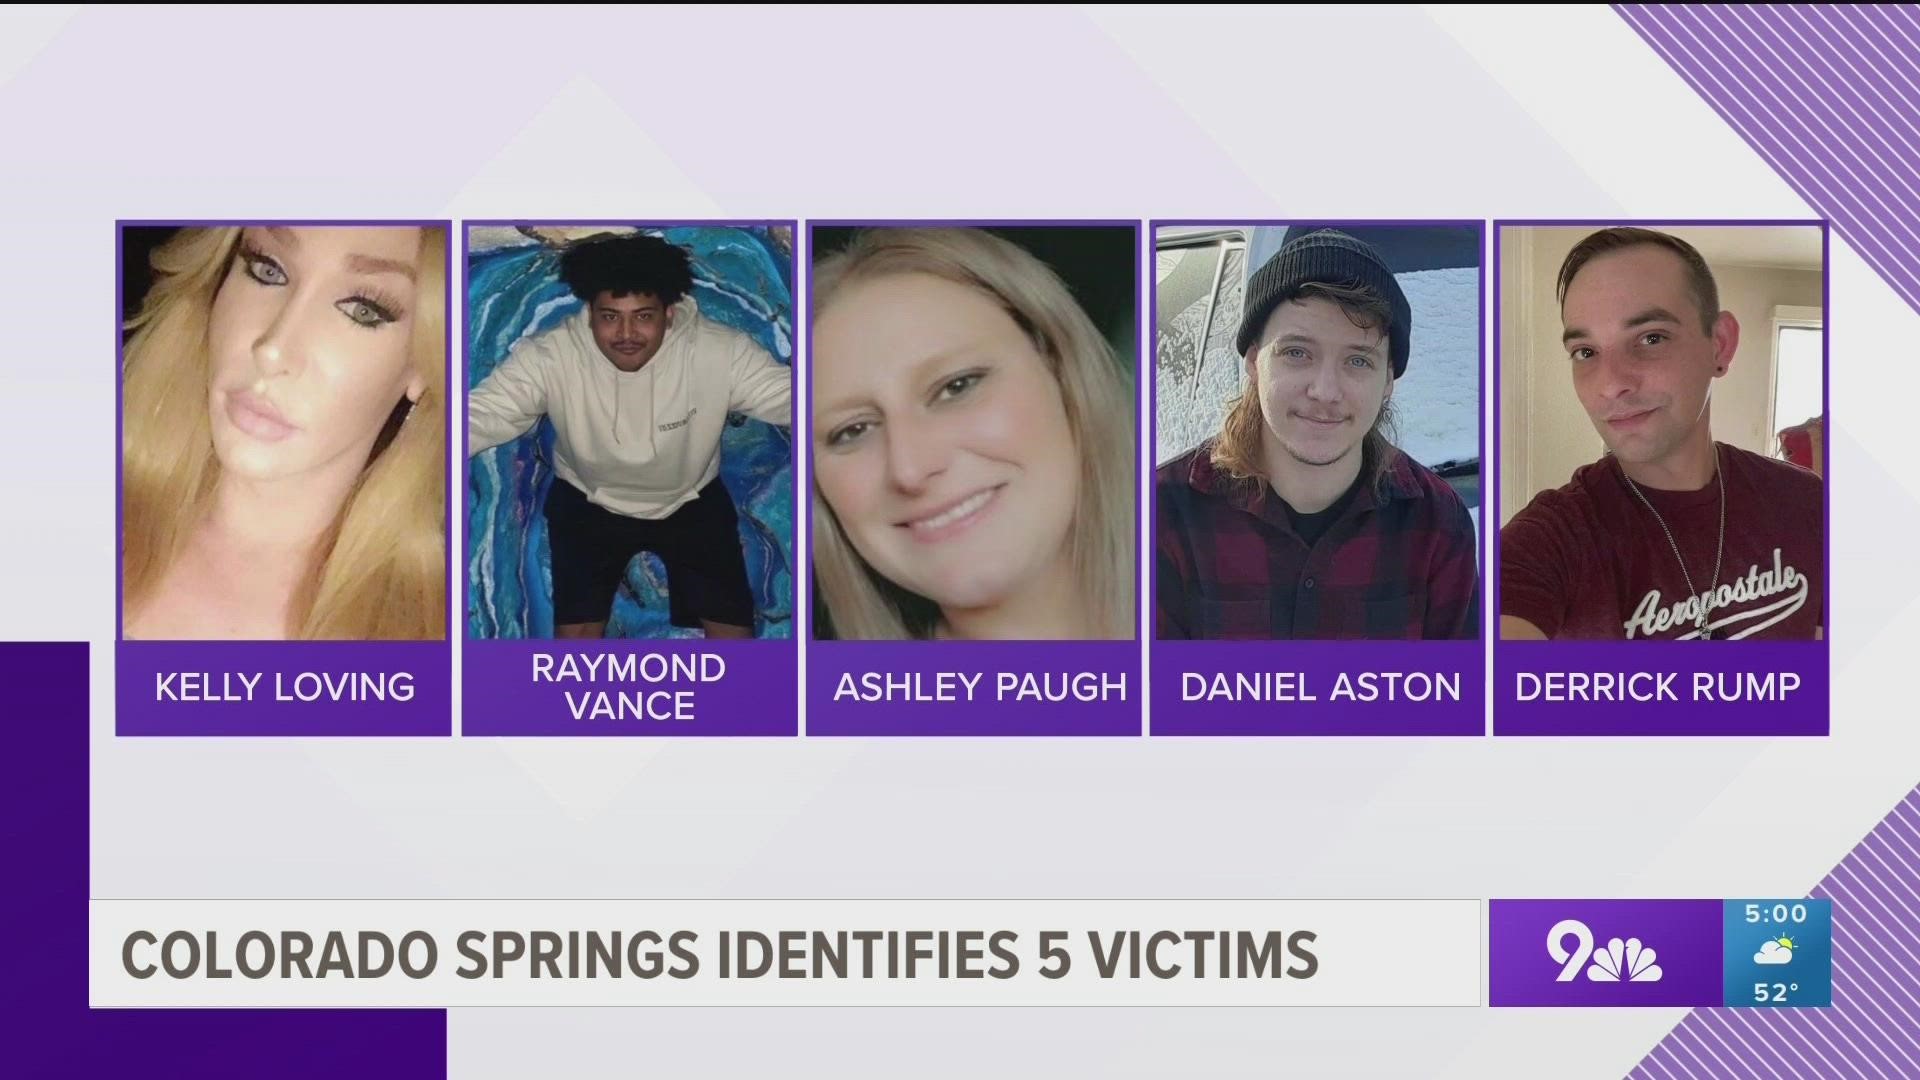 Colorado Springs Mayor and Police released the identity of the 5 victims killed in the shooting and the 2 heroic people who stopped the gunman.